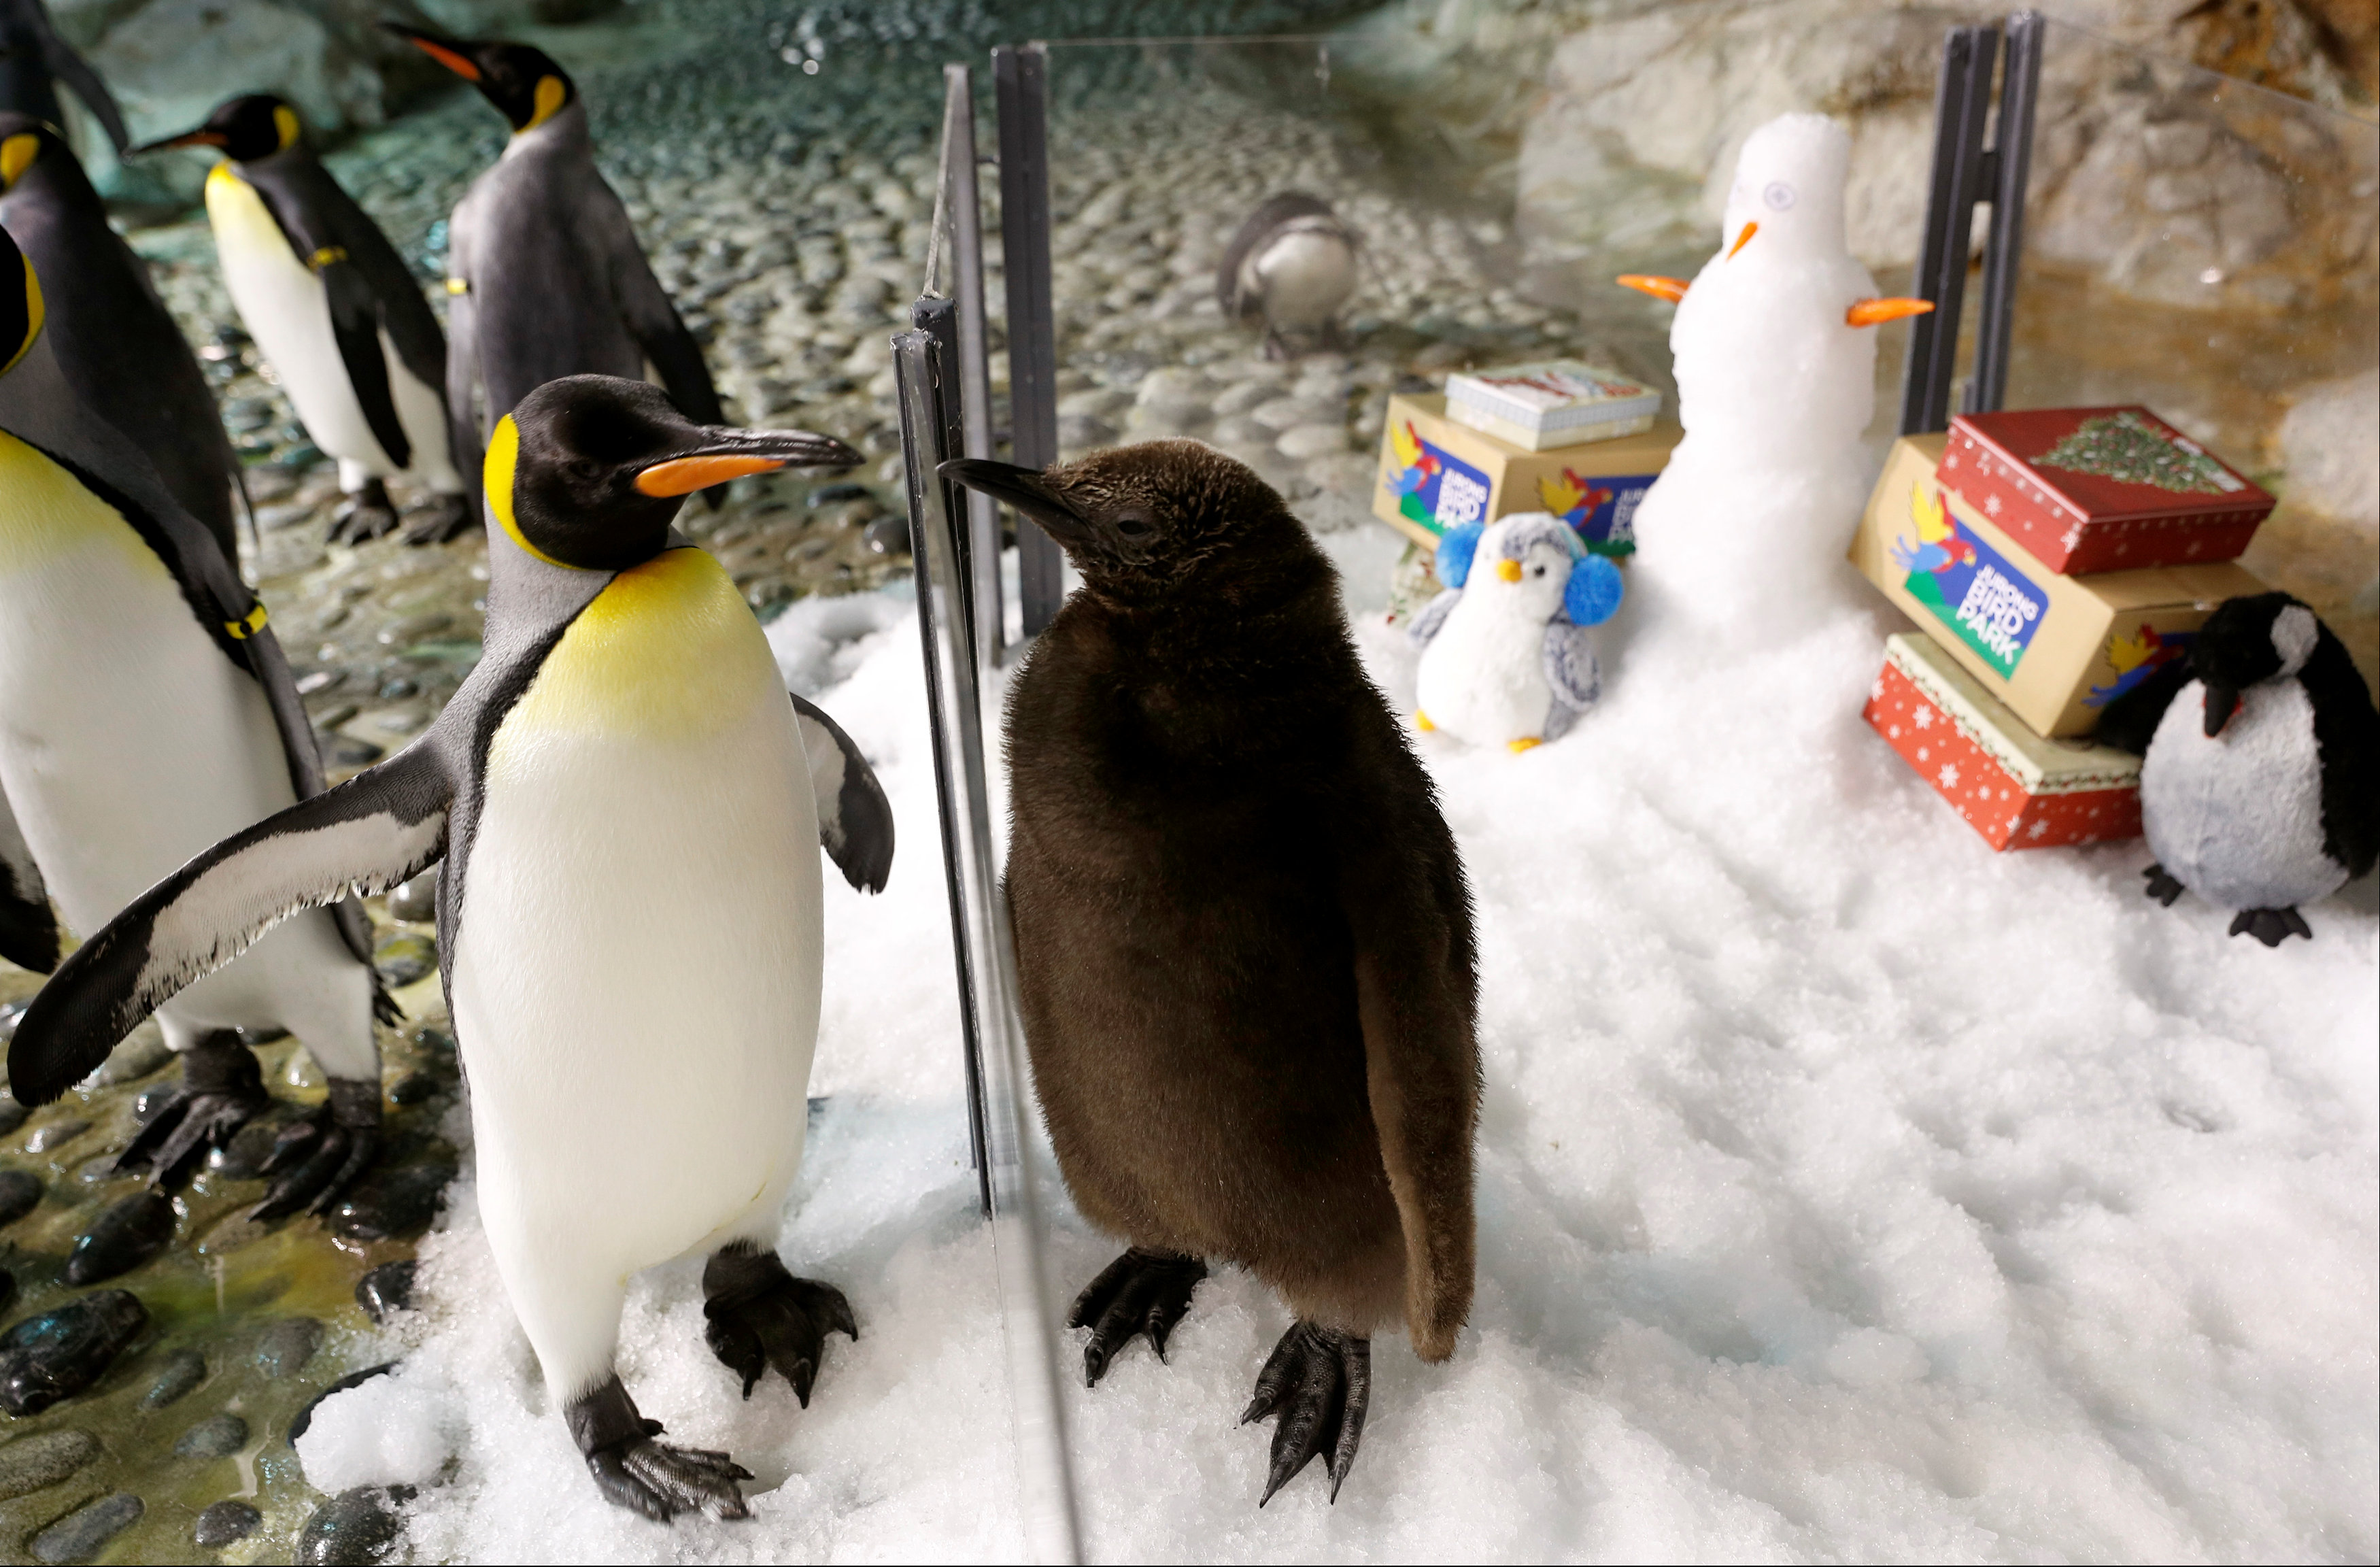 In pictures: Baby penguin 'Maru' in Singapore